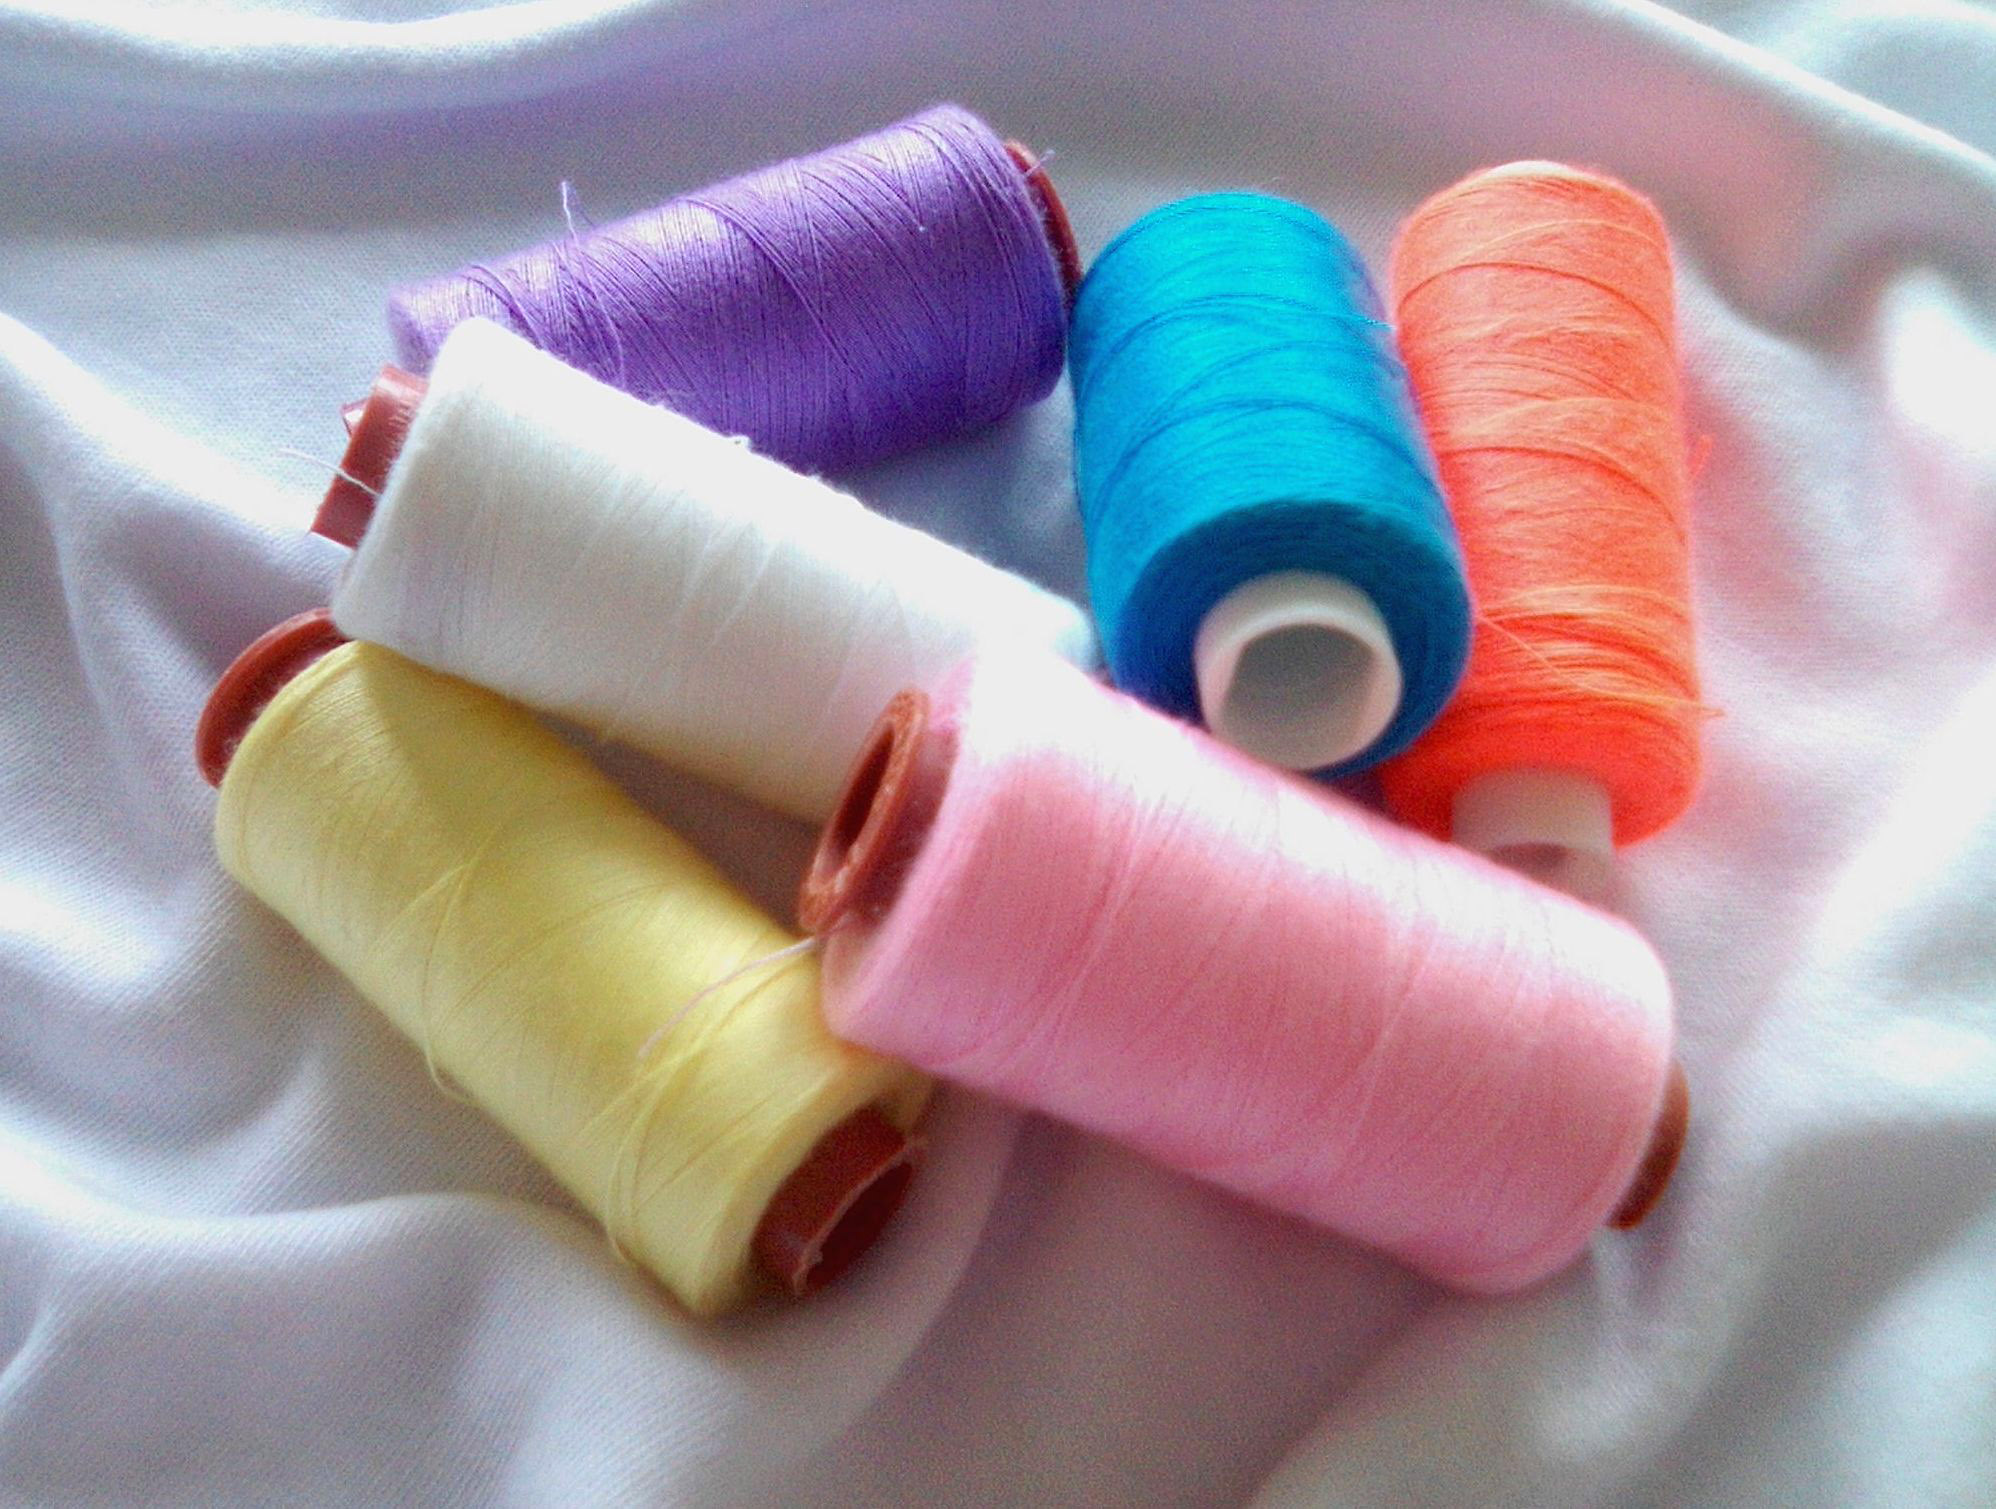 Download Coloring Sewing Threads Photo image - Free stock photo ...